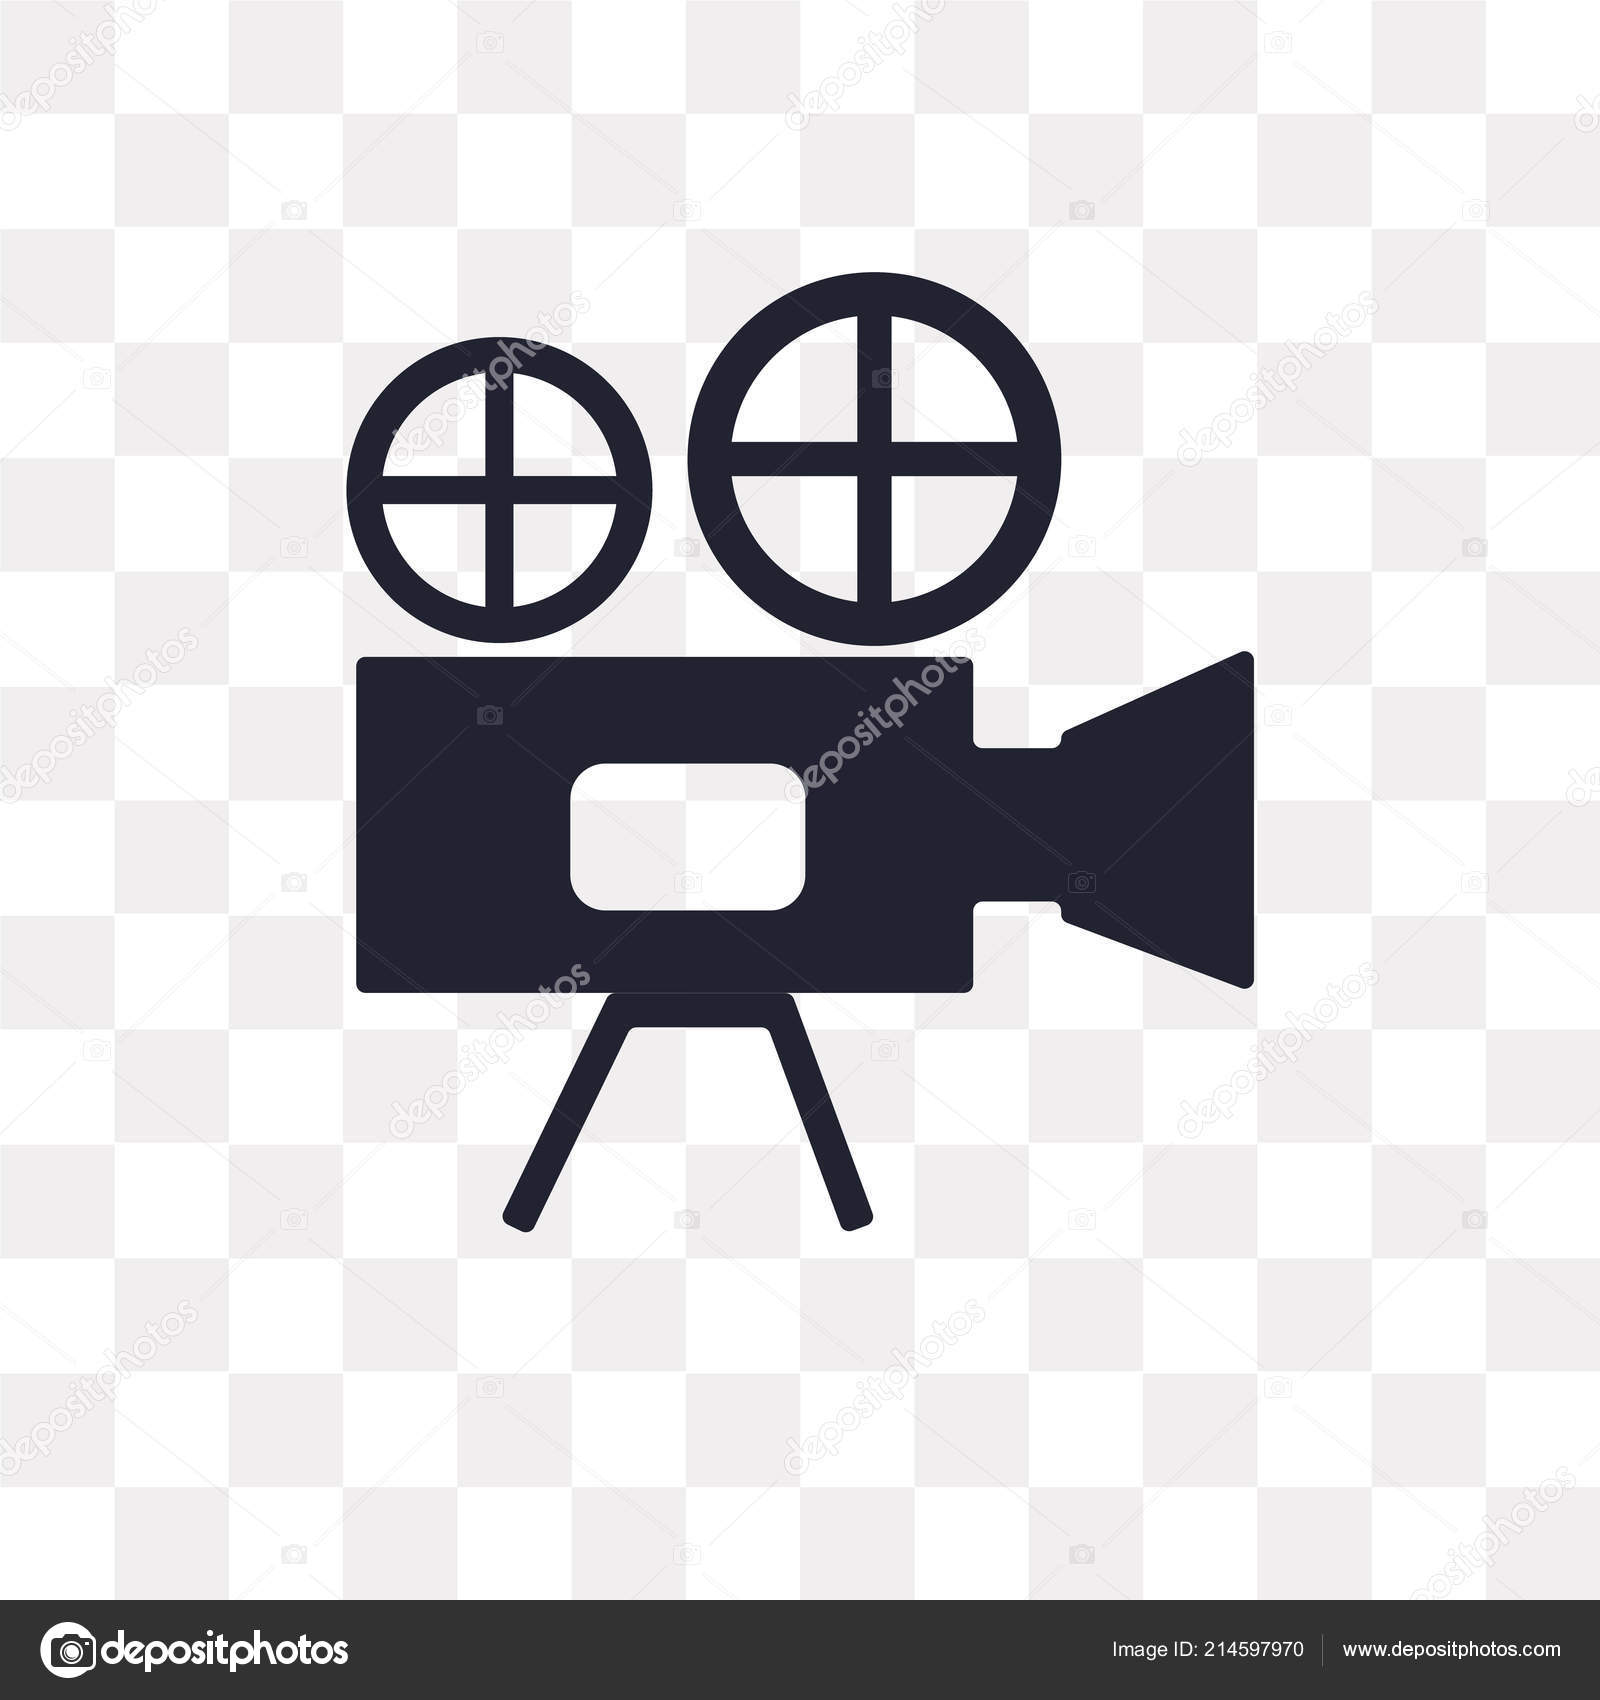 Video Camera Vector Icon Isolated Transparent Background Video Camera Logo Vector Image By C Mmvector Vector Stock 214597970 Choose from over a million free vectors, clipart graphics, vector art images, design templates, and illustrations created by artists worldwide! https depositphotos com 214597970 stock illustration video camera vector icon isolated html